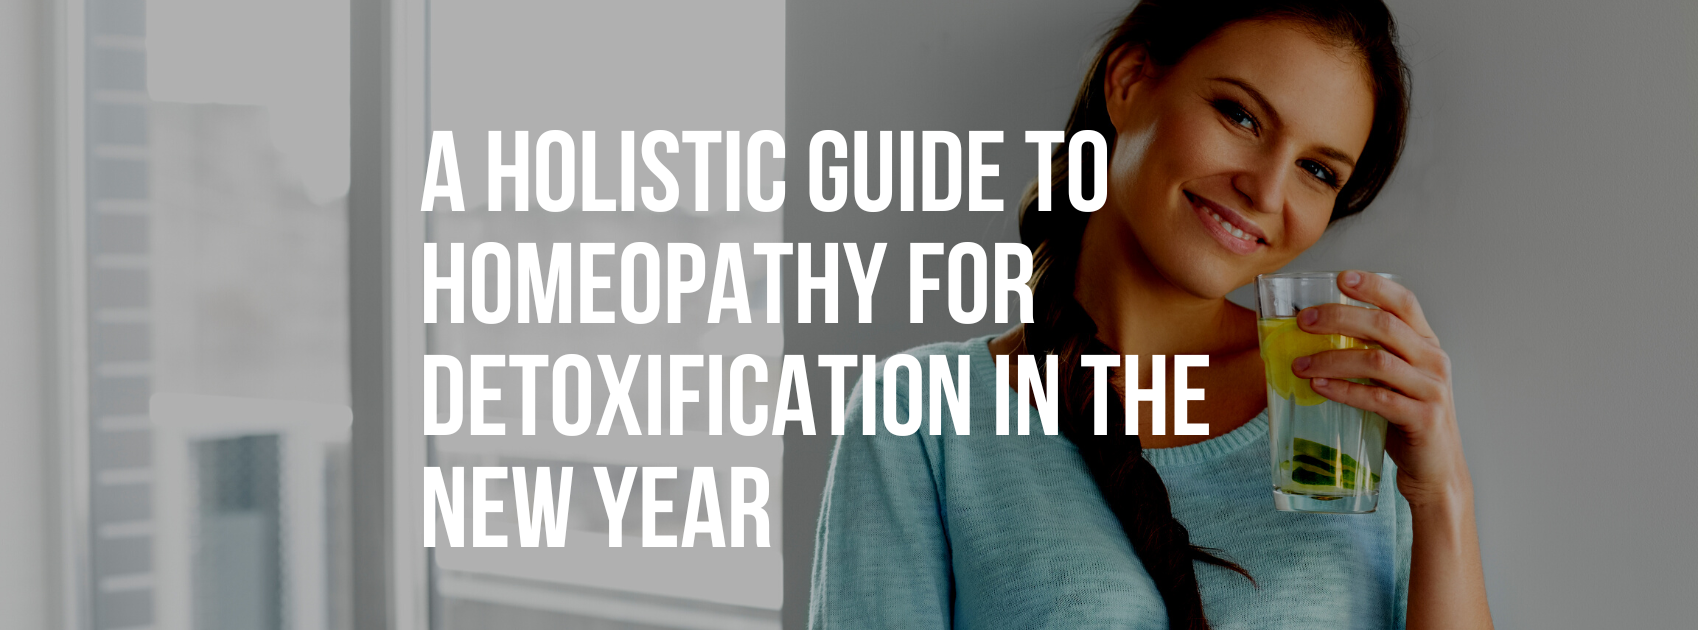 A Holistic Guide to a Homeopathic Detox in the New Year